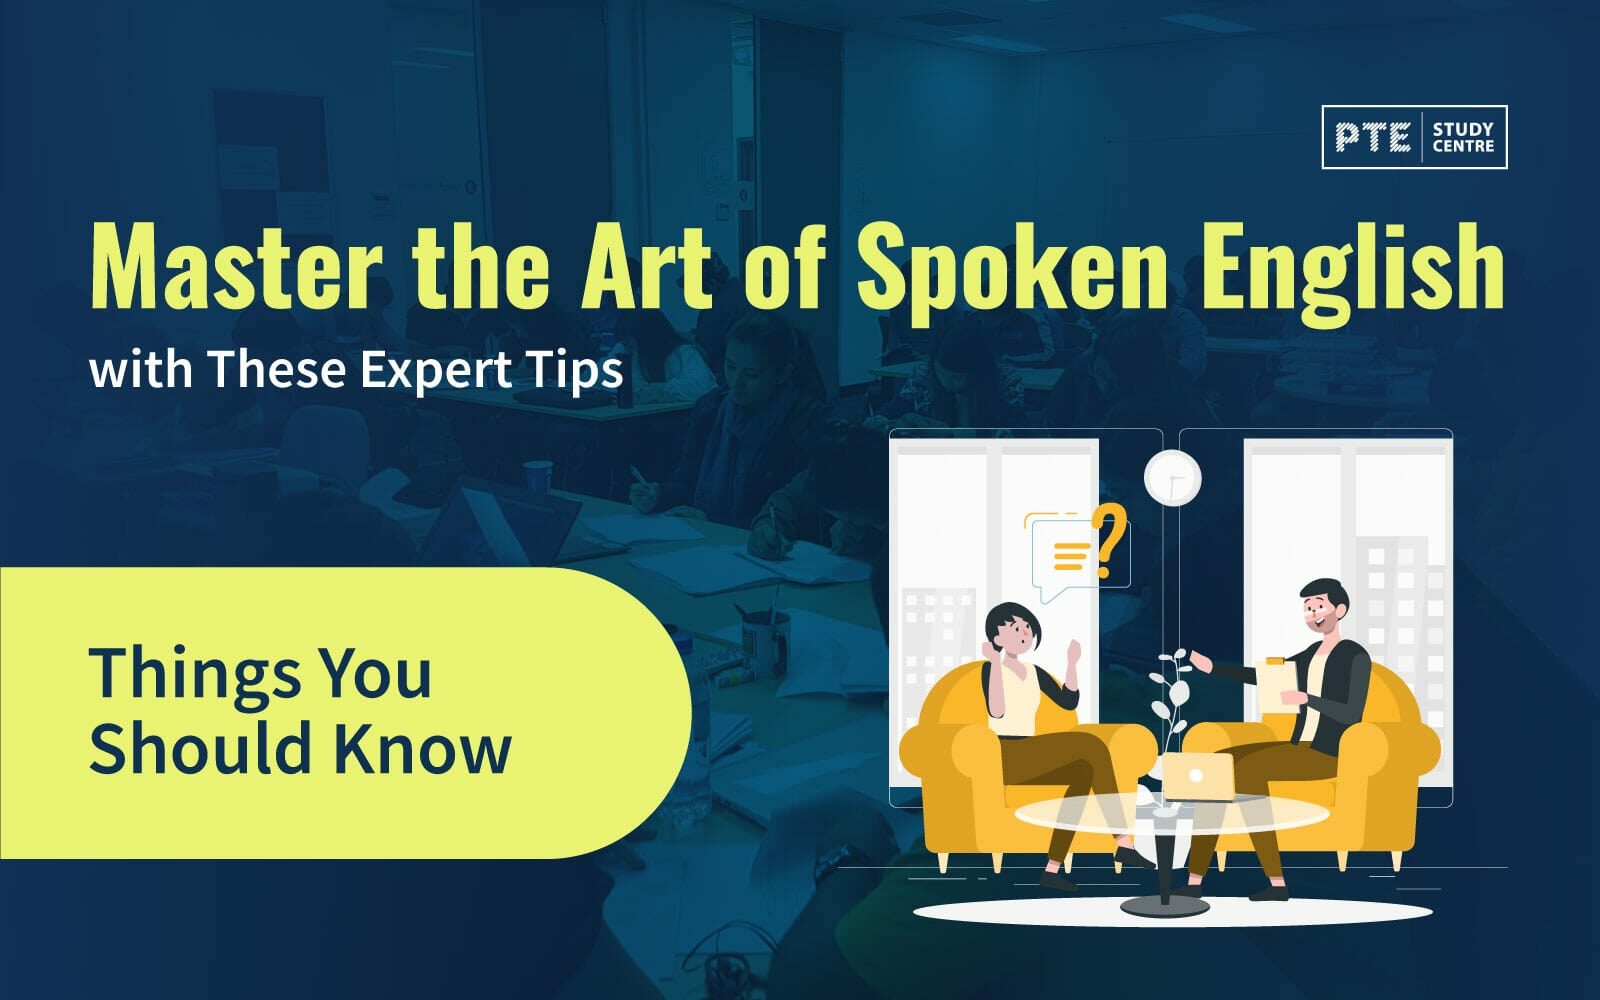 Master the Art of Spoken English with These Expert Tips